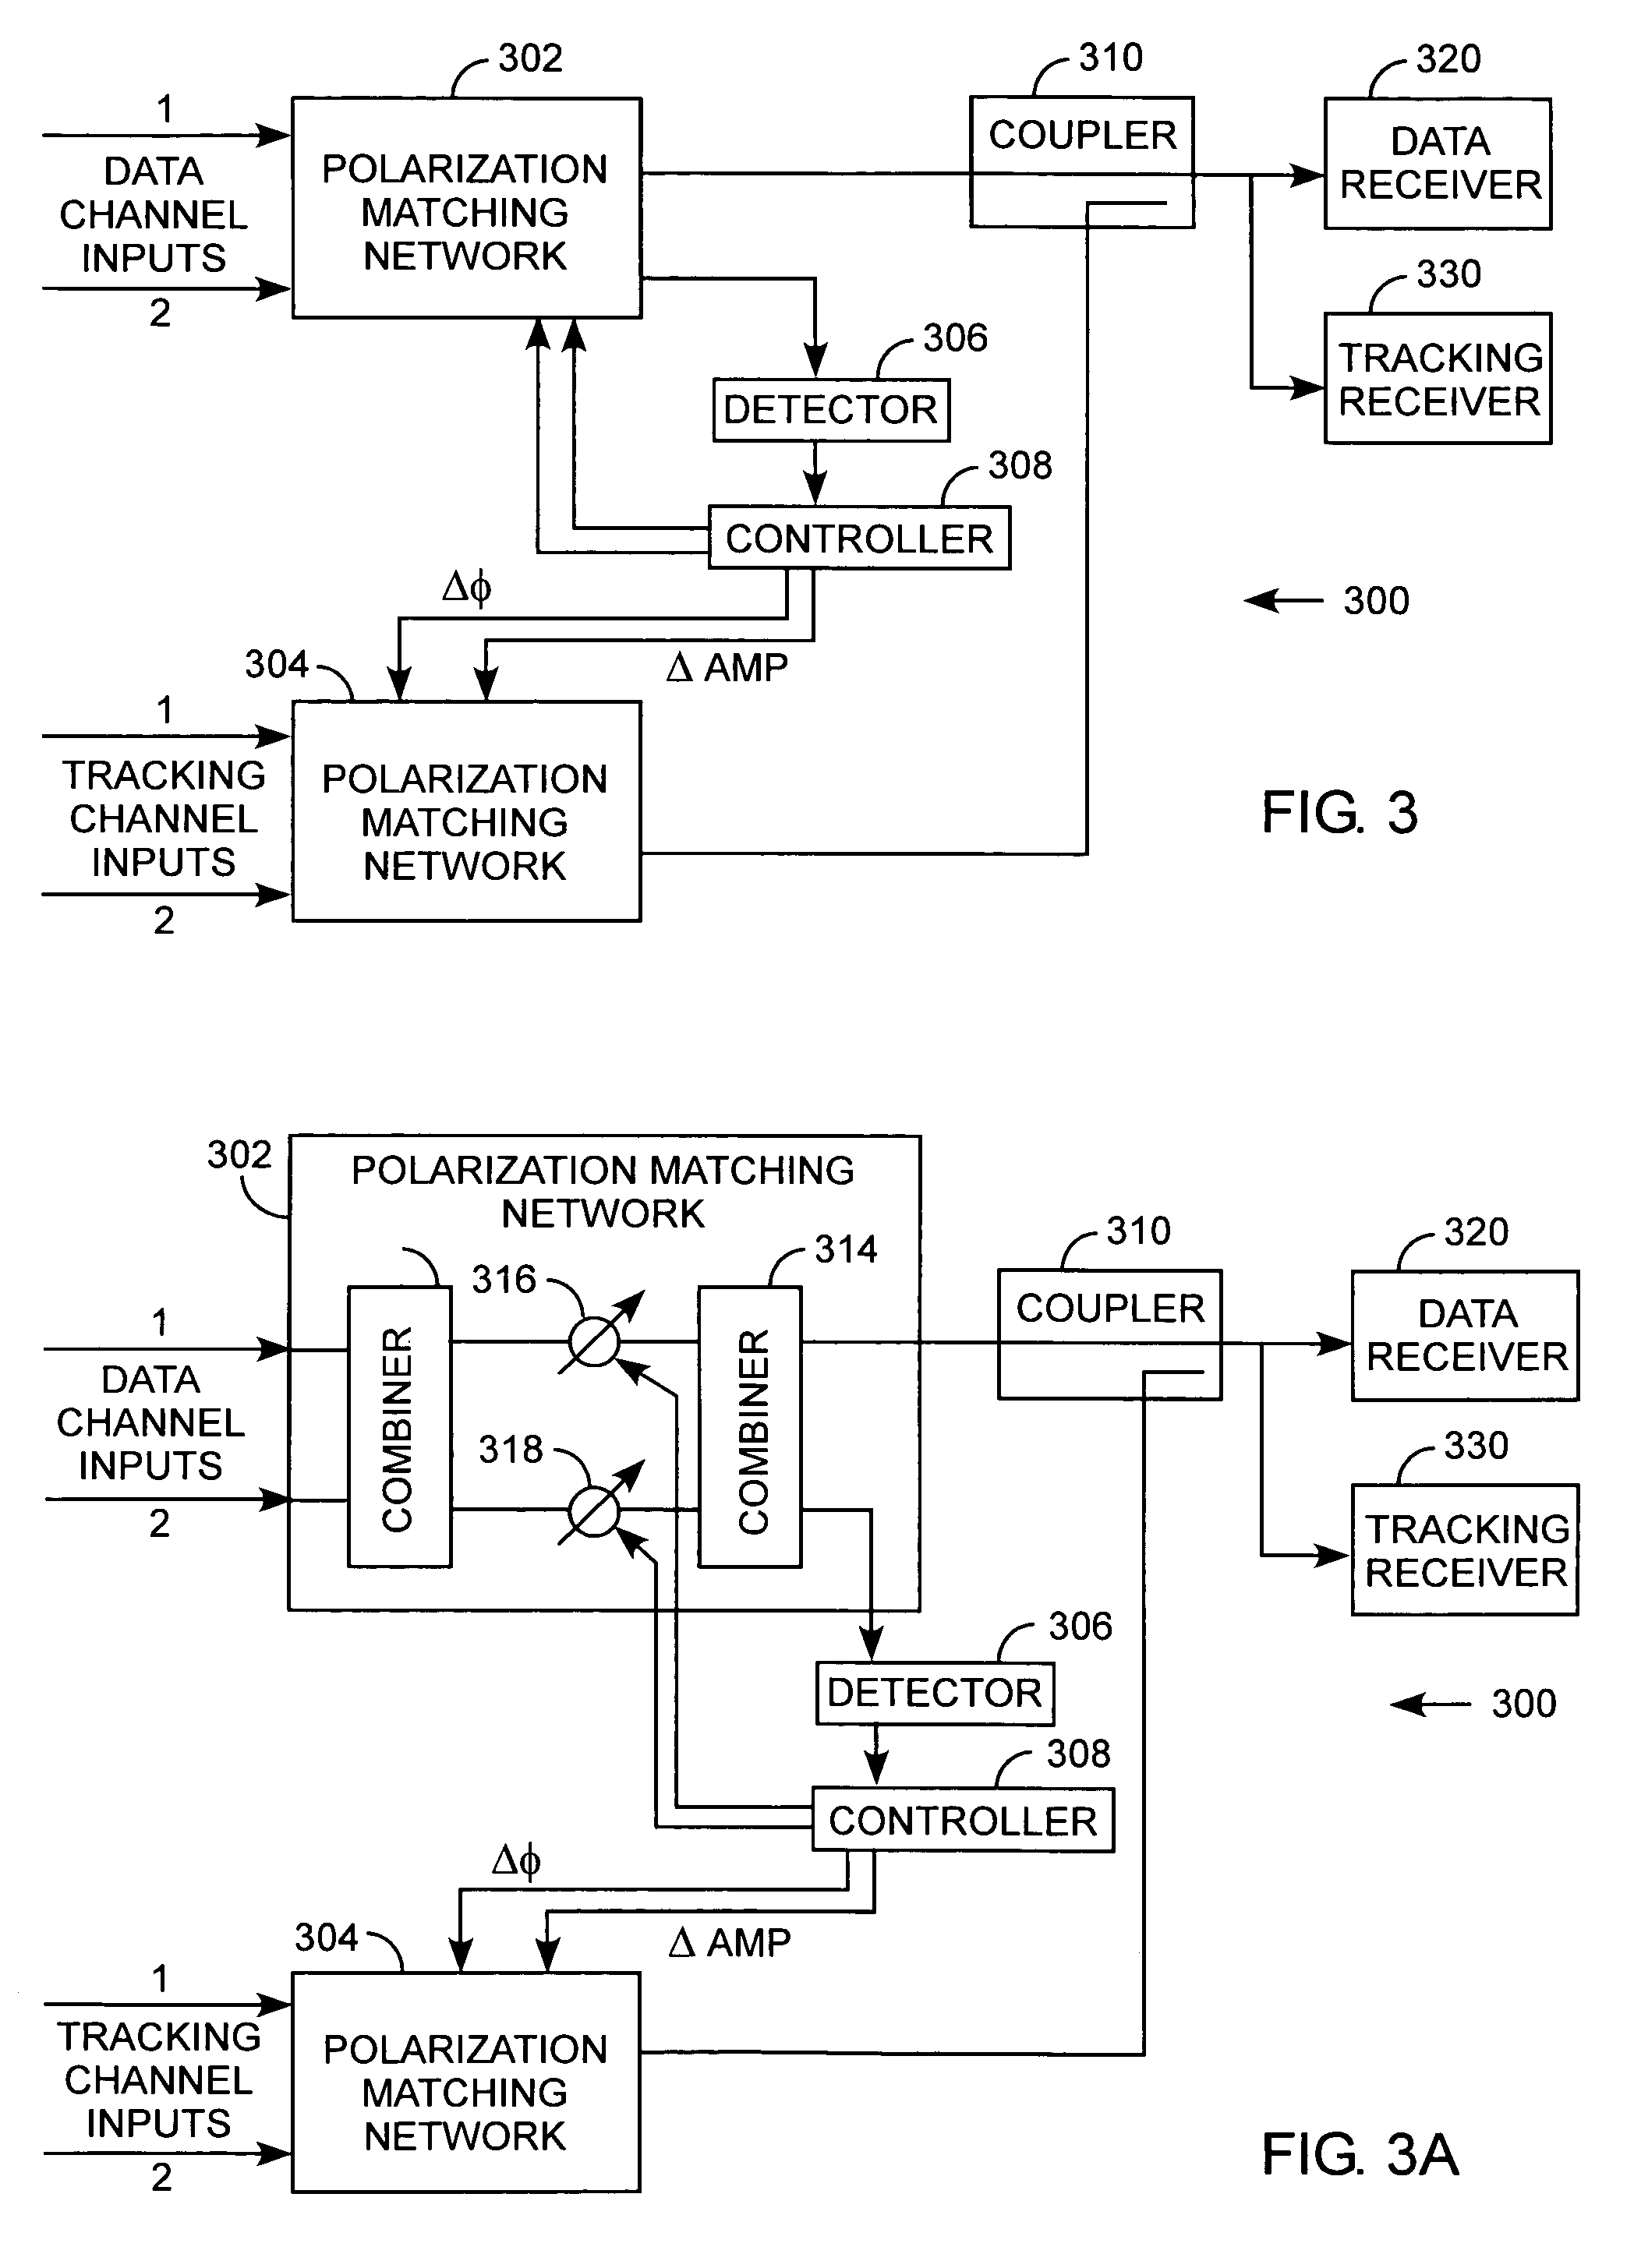 Methods and systems for tracking signals with diverse polarization properties